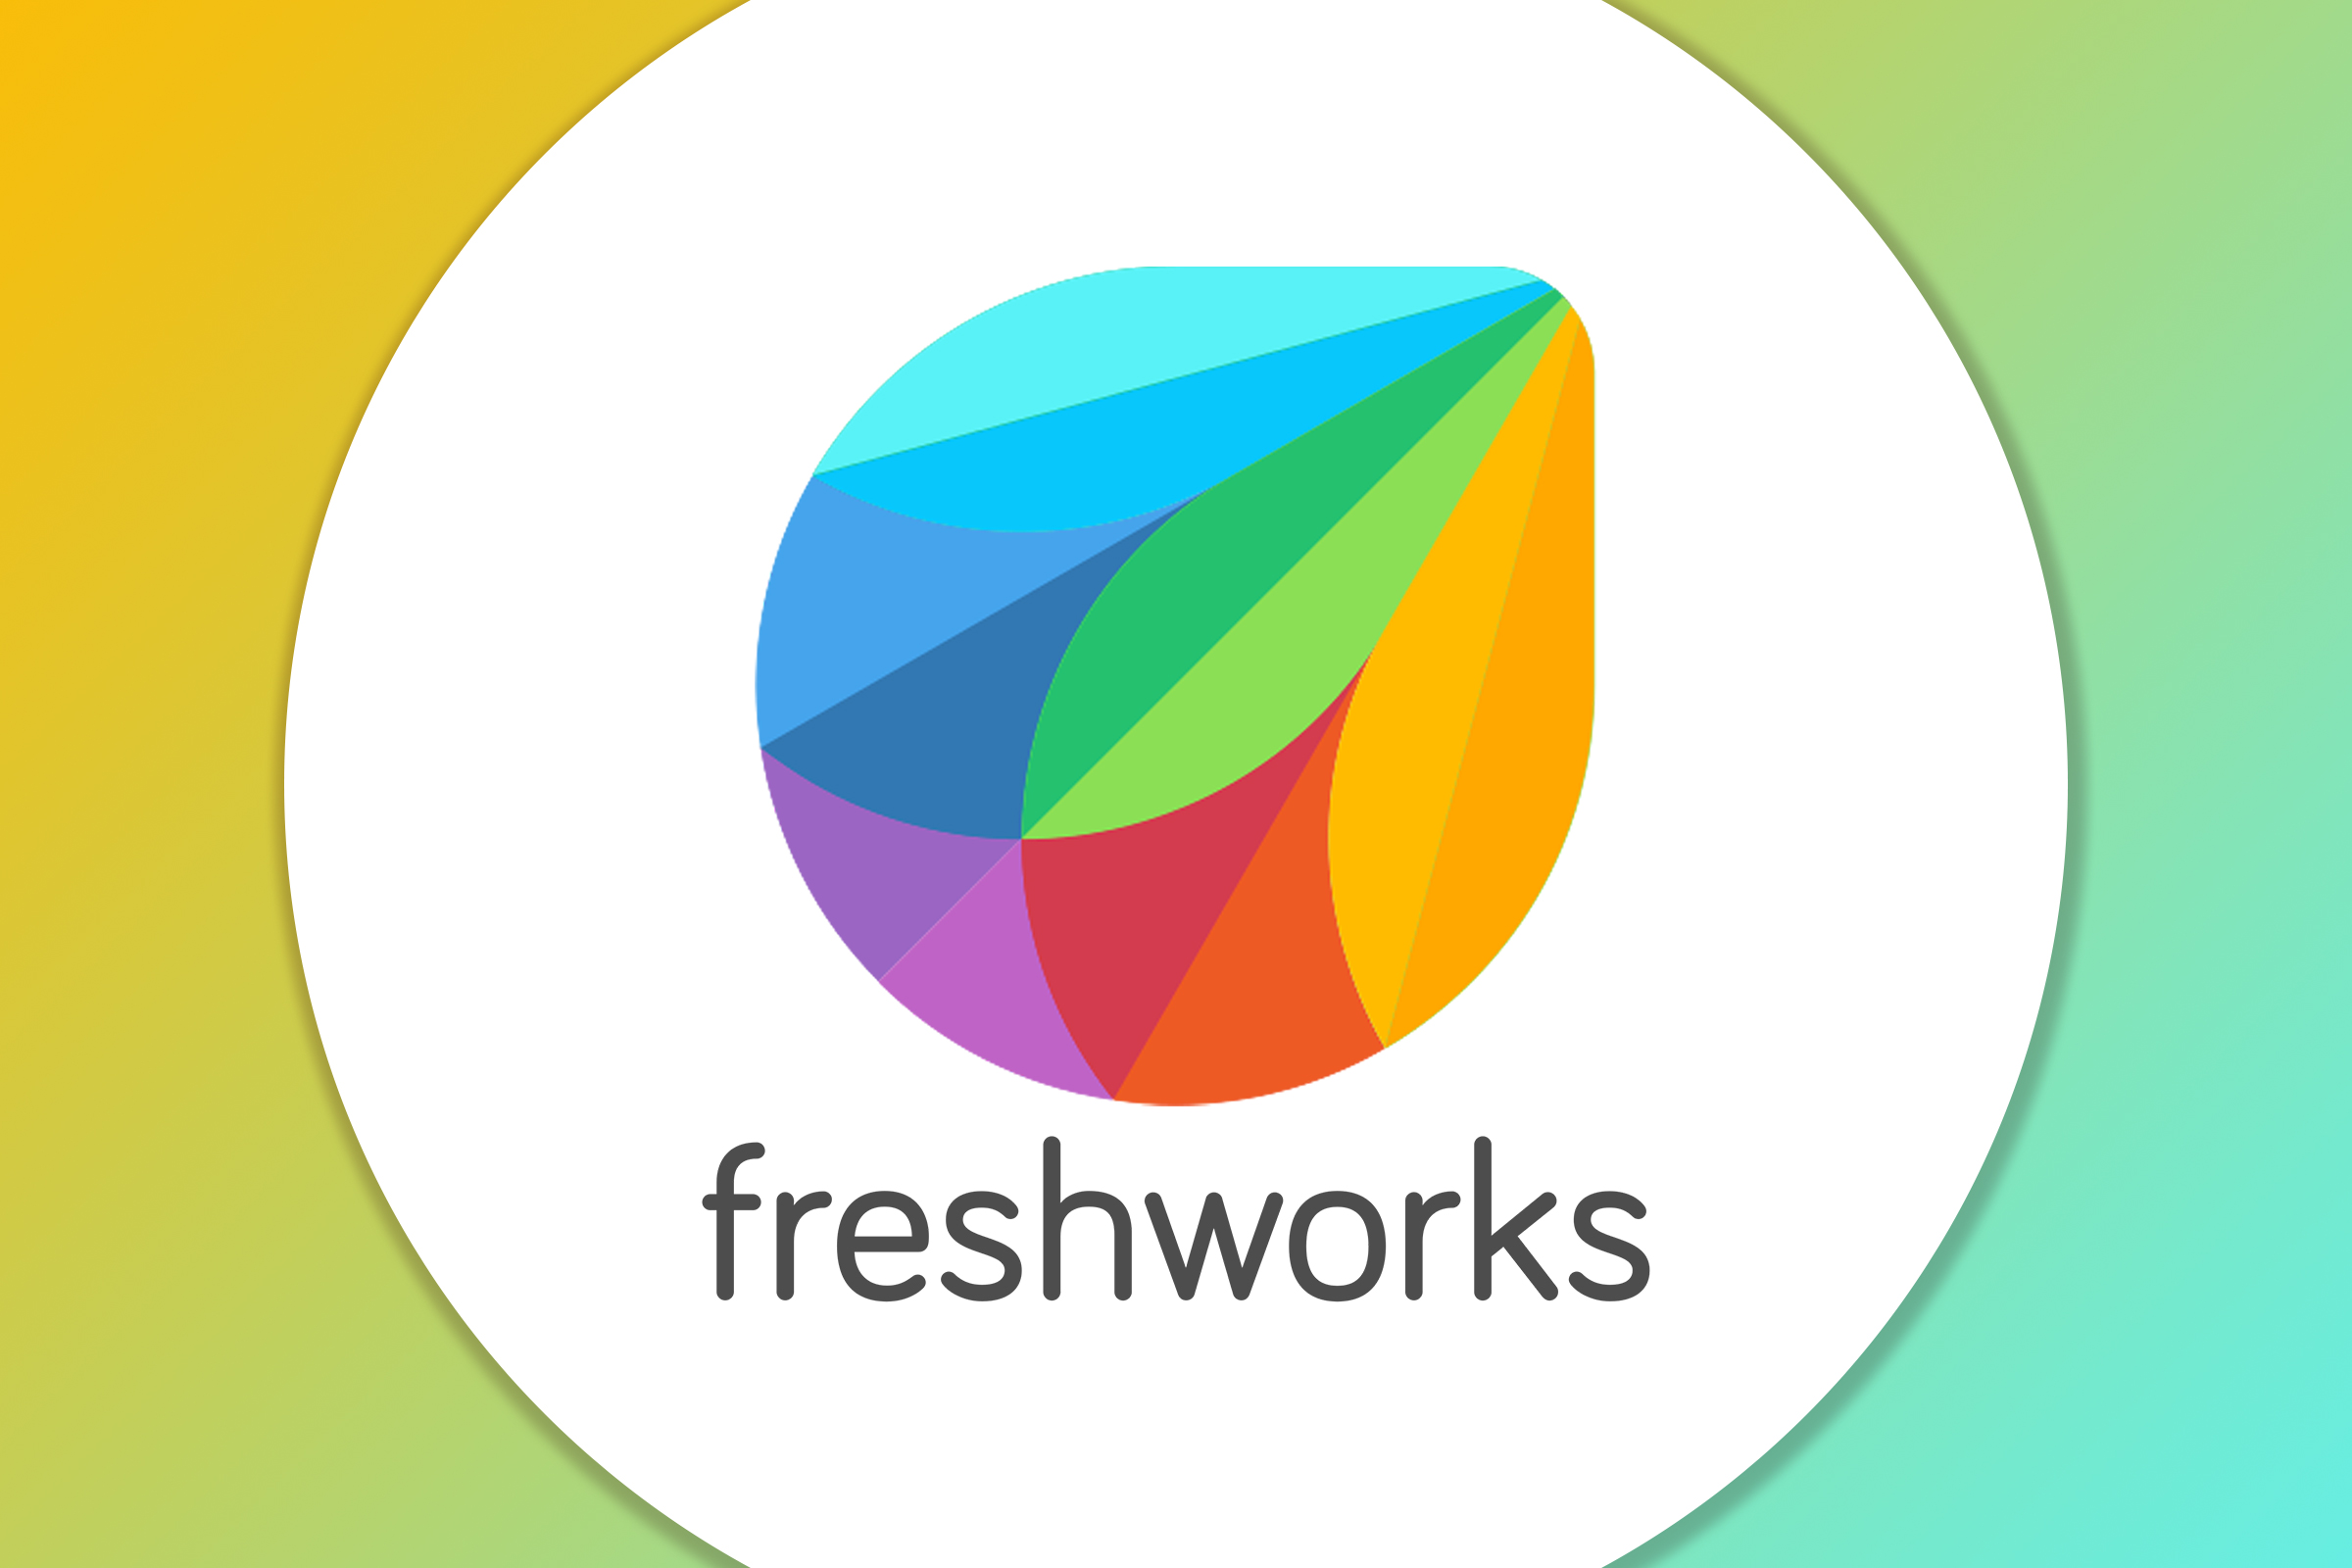 Freshworks Inc. Continues Impressive Growth Trajectory with Strong Q2 Earnings and Revenue Performance